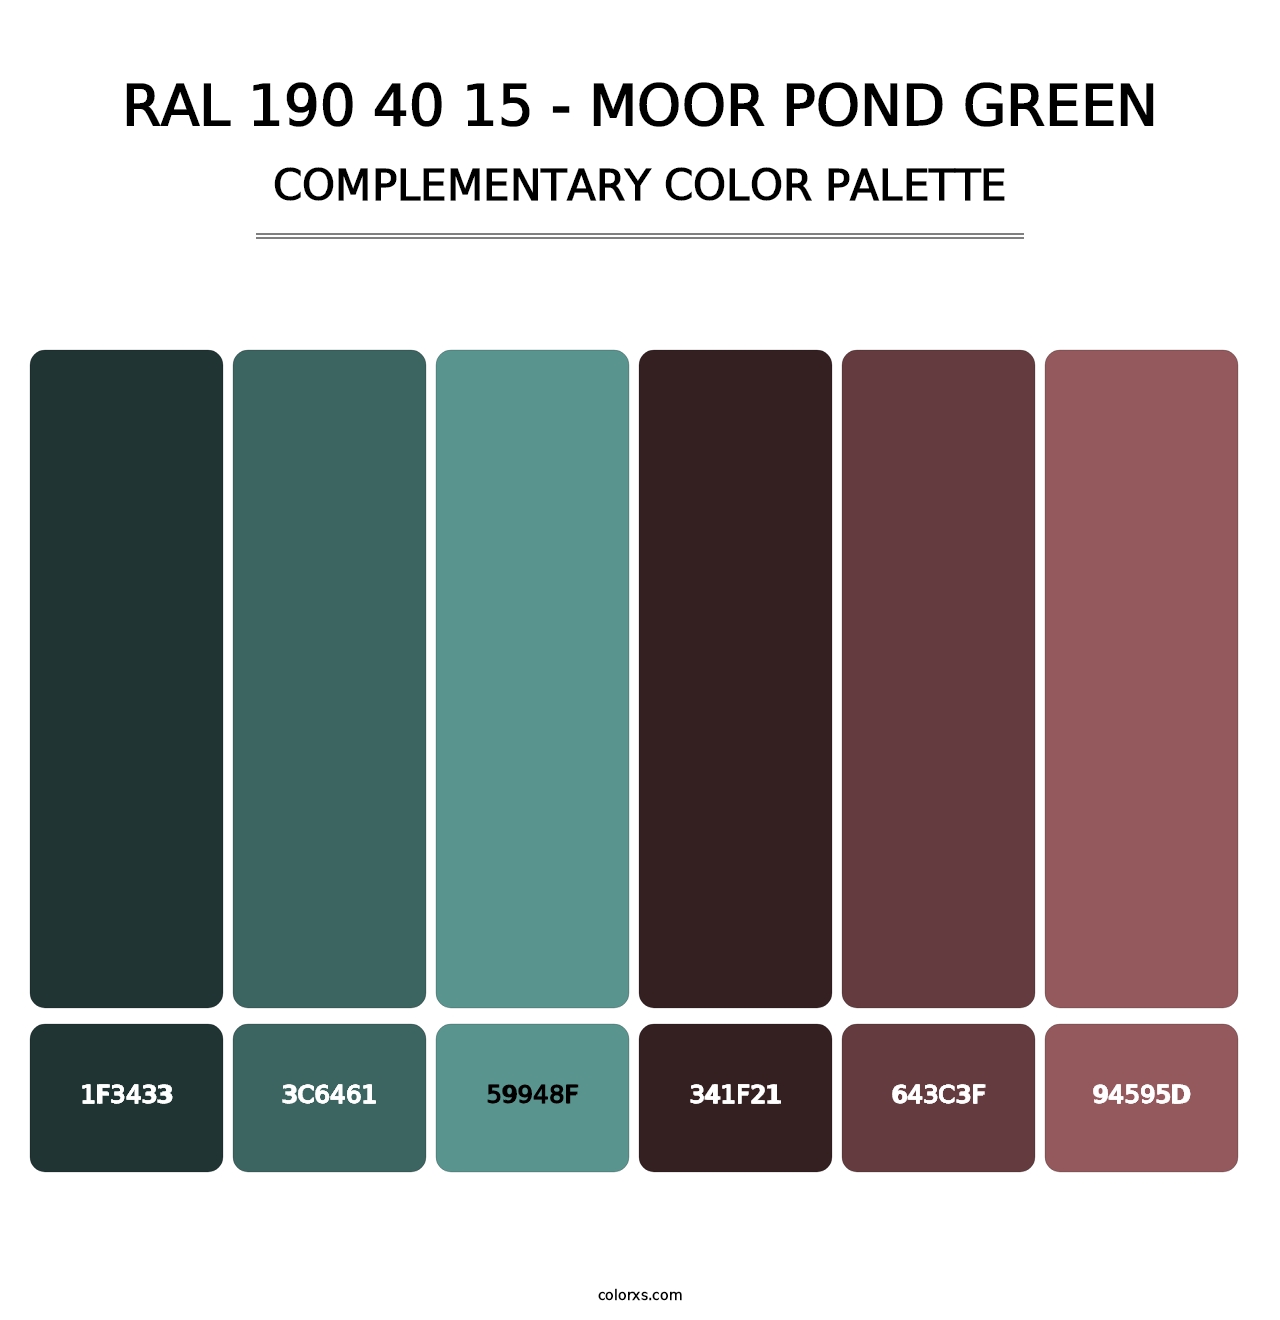 RAL 190 40 15 - Moor Pond Green - Complementary Color Palette